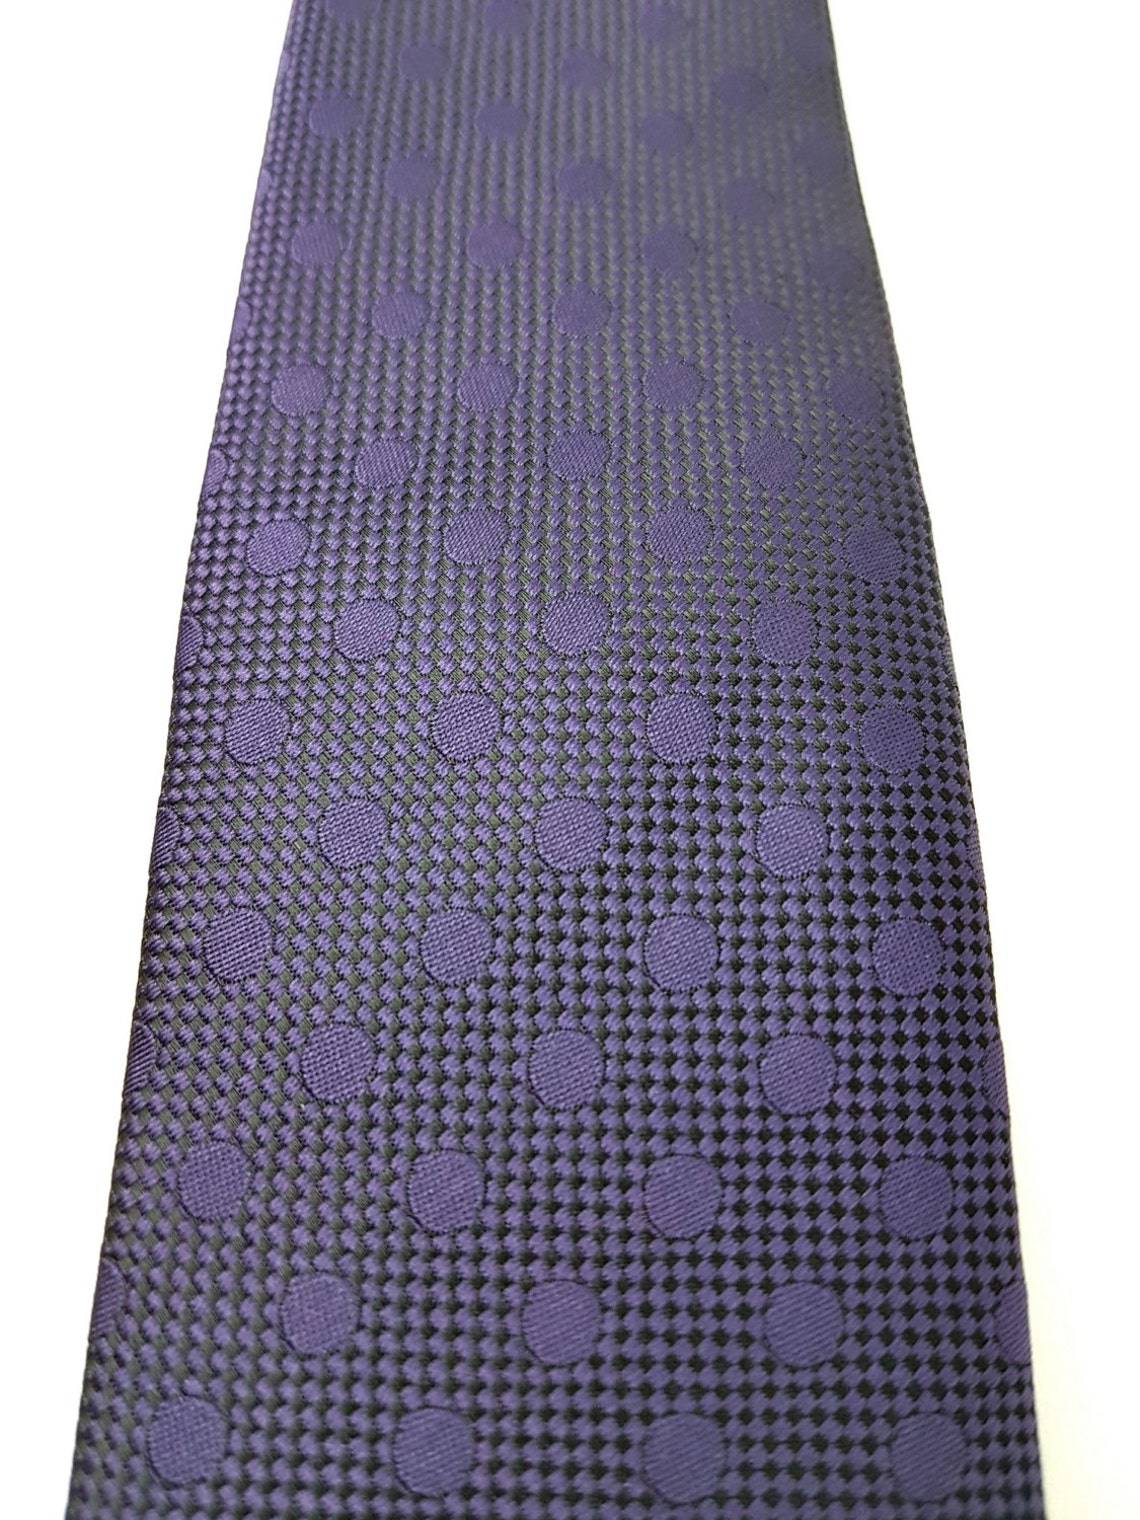 Slim Tie 2.75 Inch in Modern Solid Tonal POLKA DOTS With - Etsy